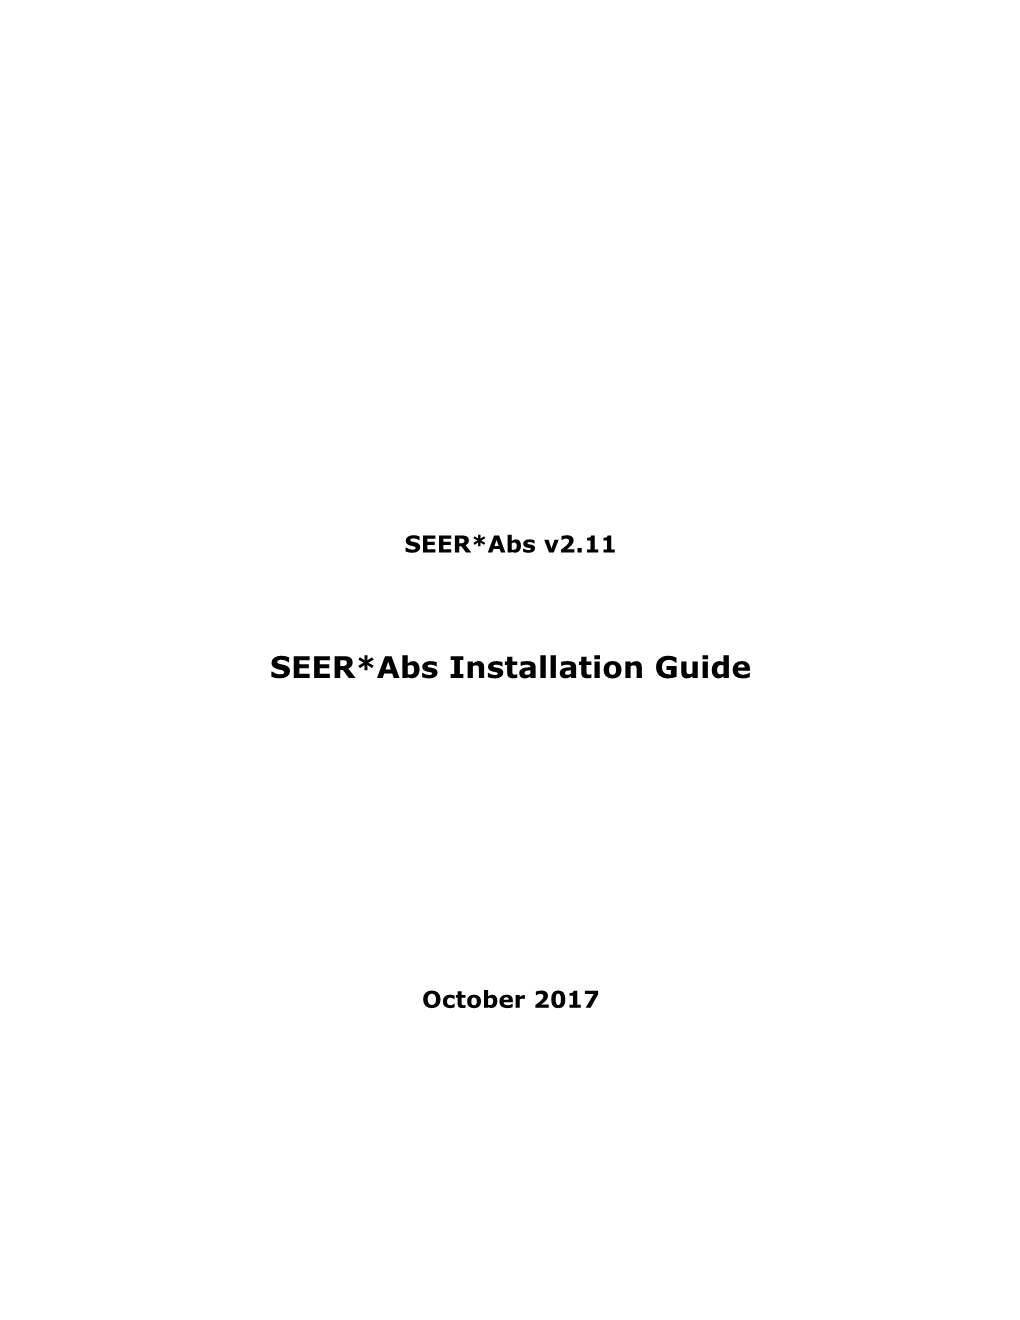 SEER*Abs Installation Guide